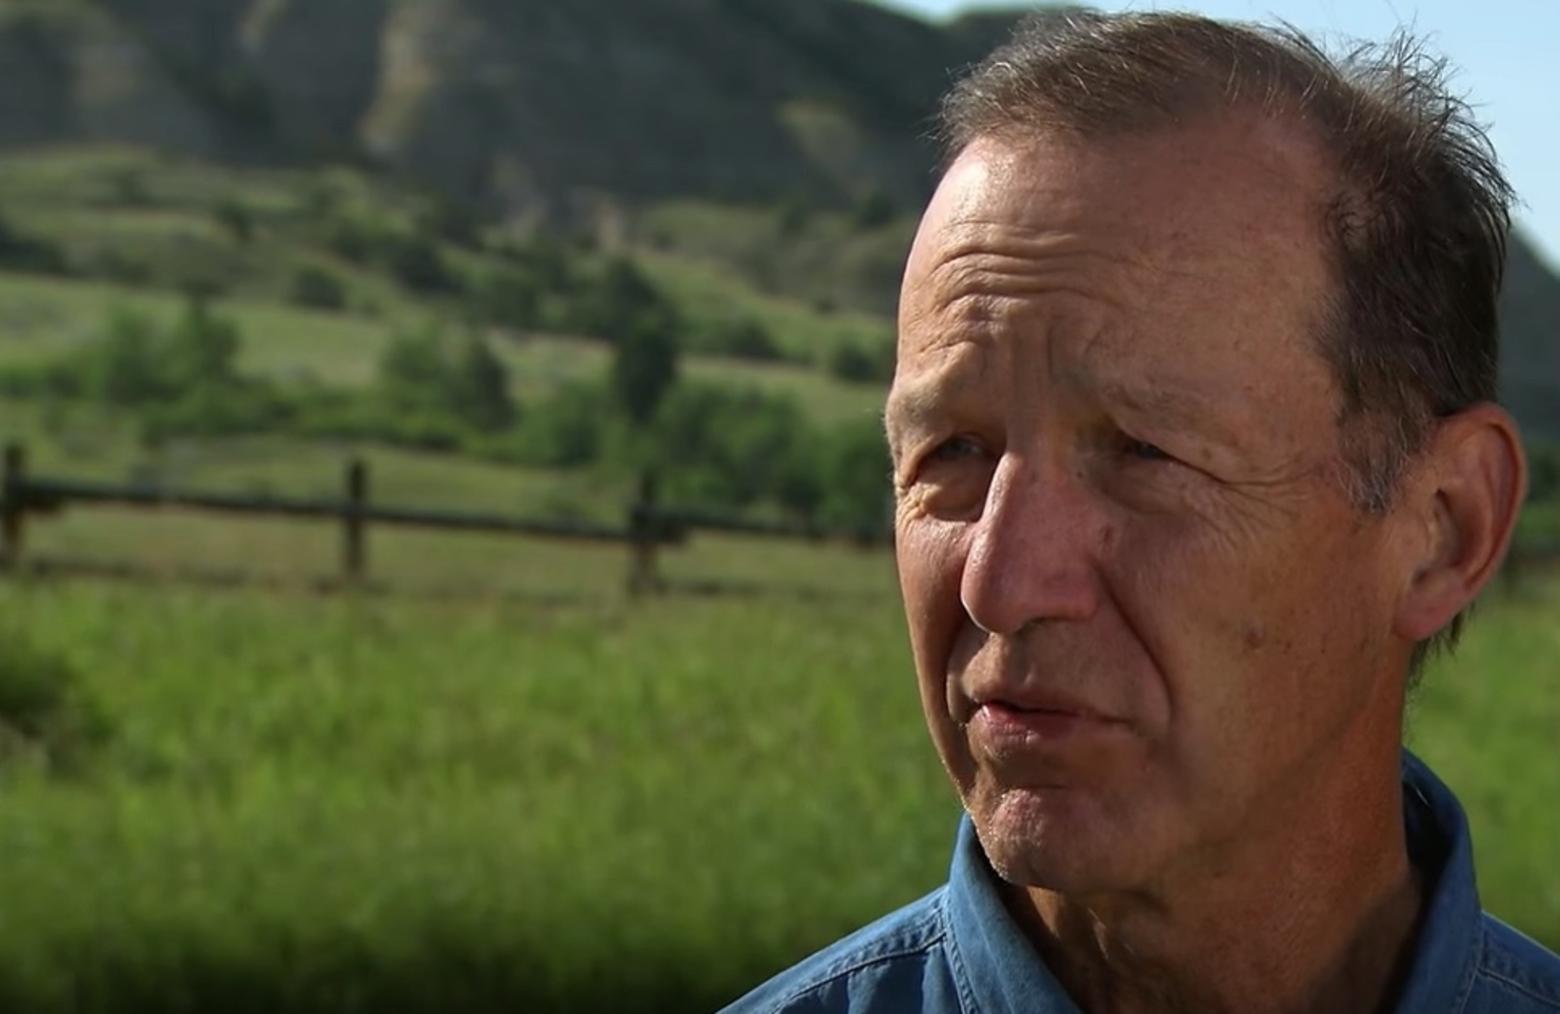 Ted Roosevelt IV out in North Dakota where his great grandfather's legendary conservation ethic began.  Image is screenshot of CBS Sunday Morning piece on Roosevelt. View video story at bottom of this piece.